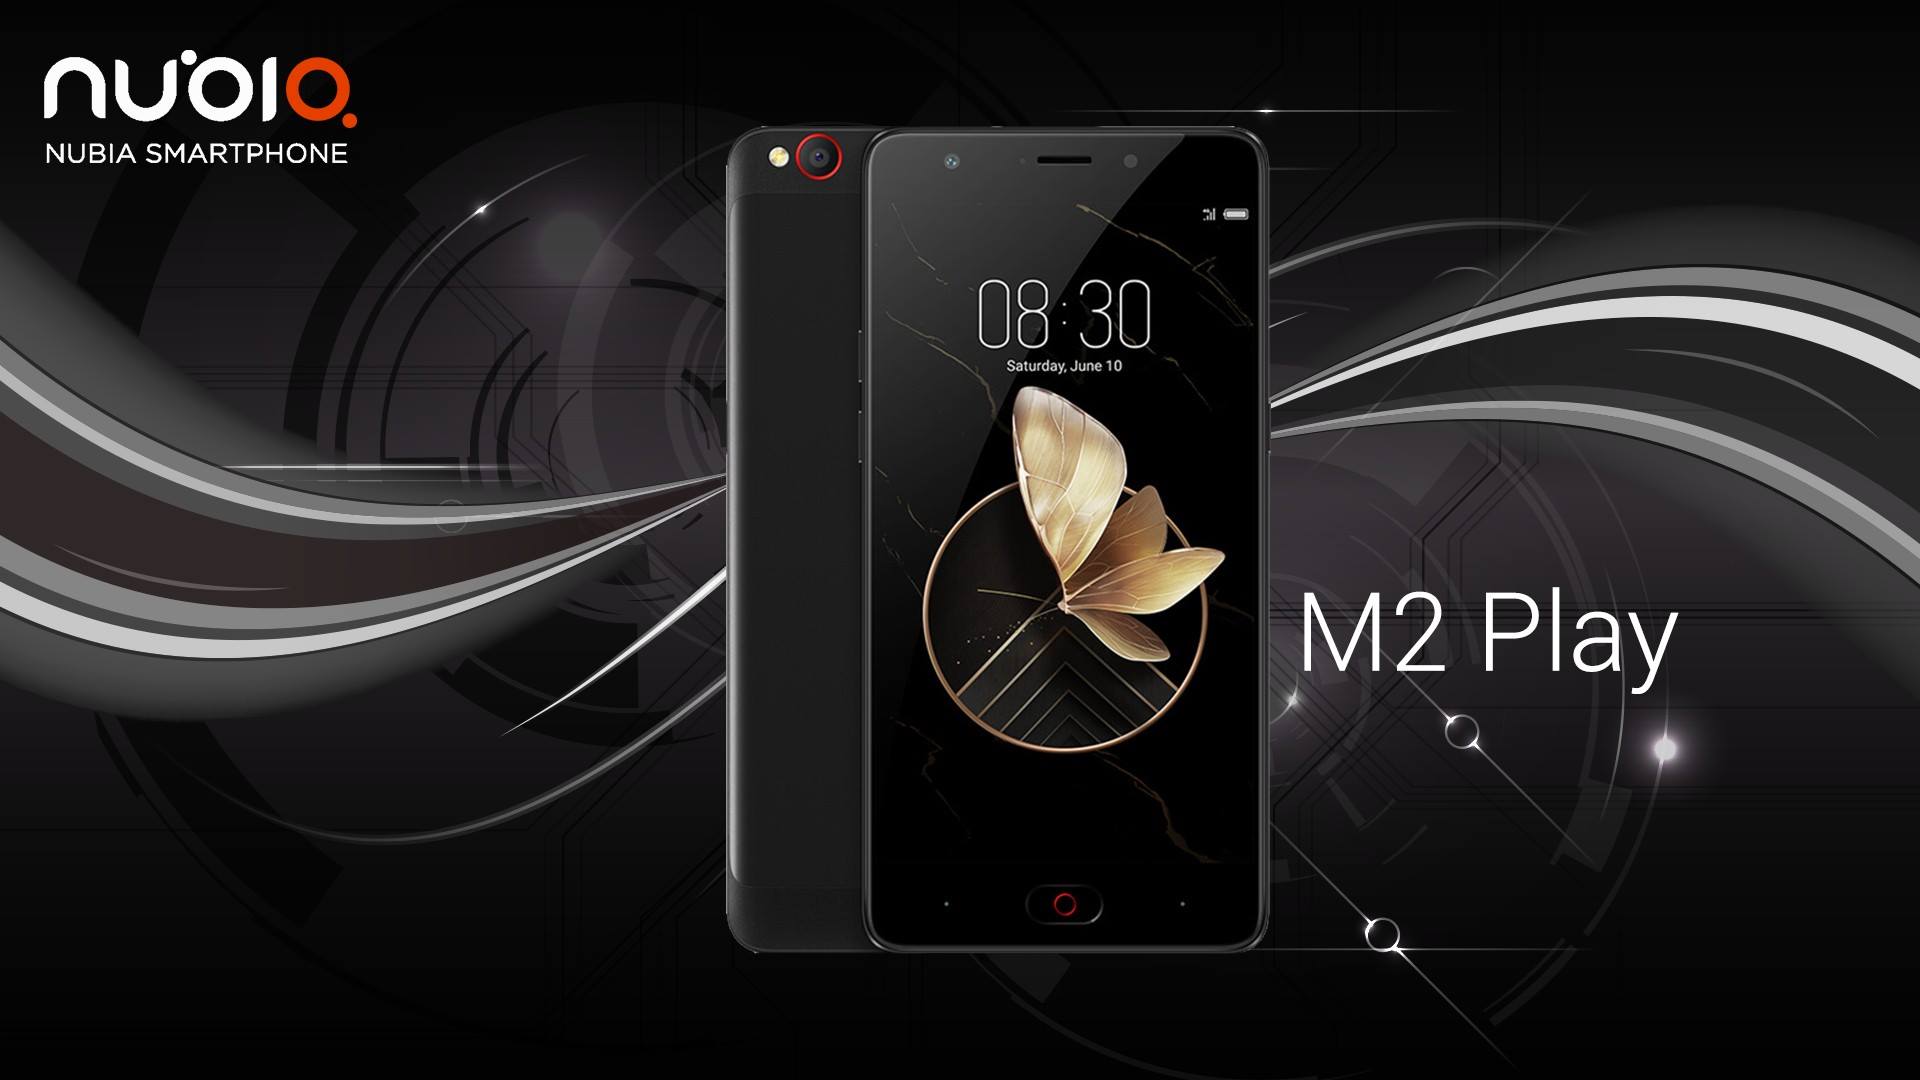 Entry-level phablet Nubia M2 Play now available in Malaysia for just RM799